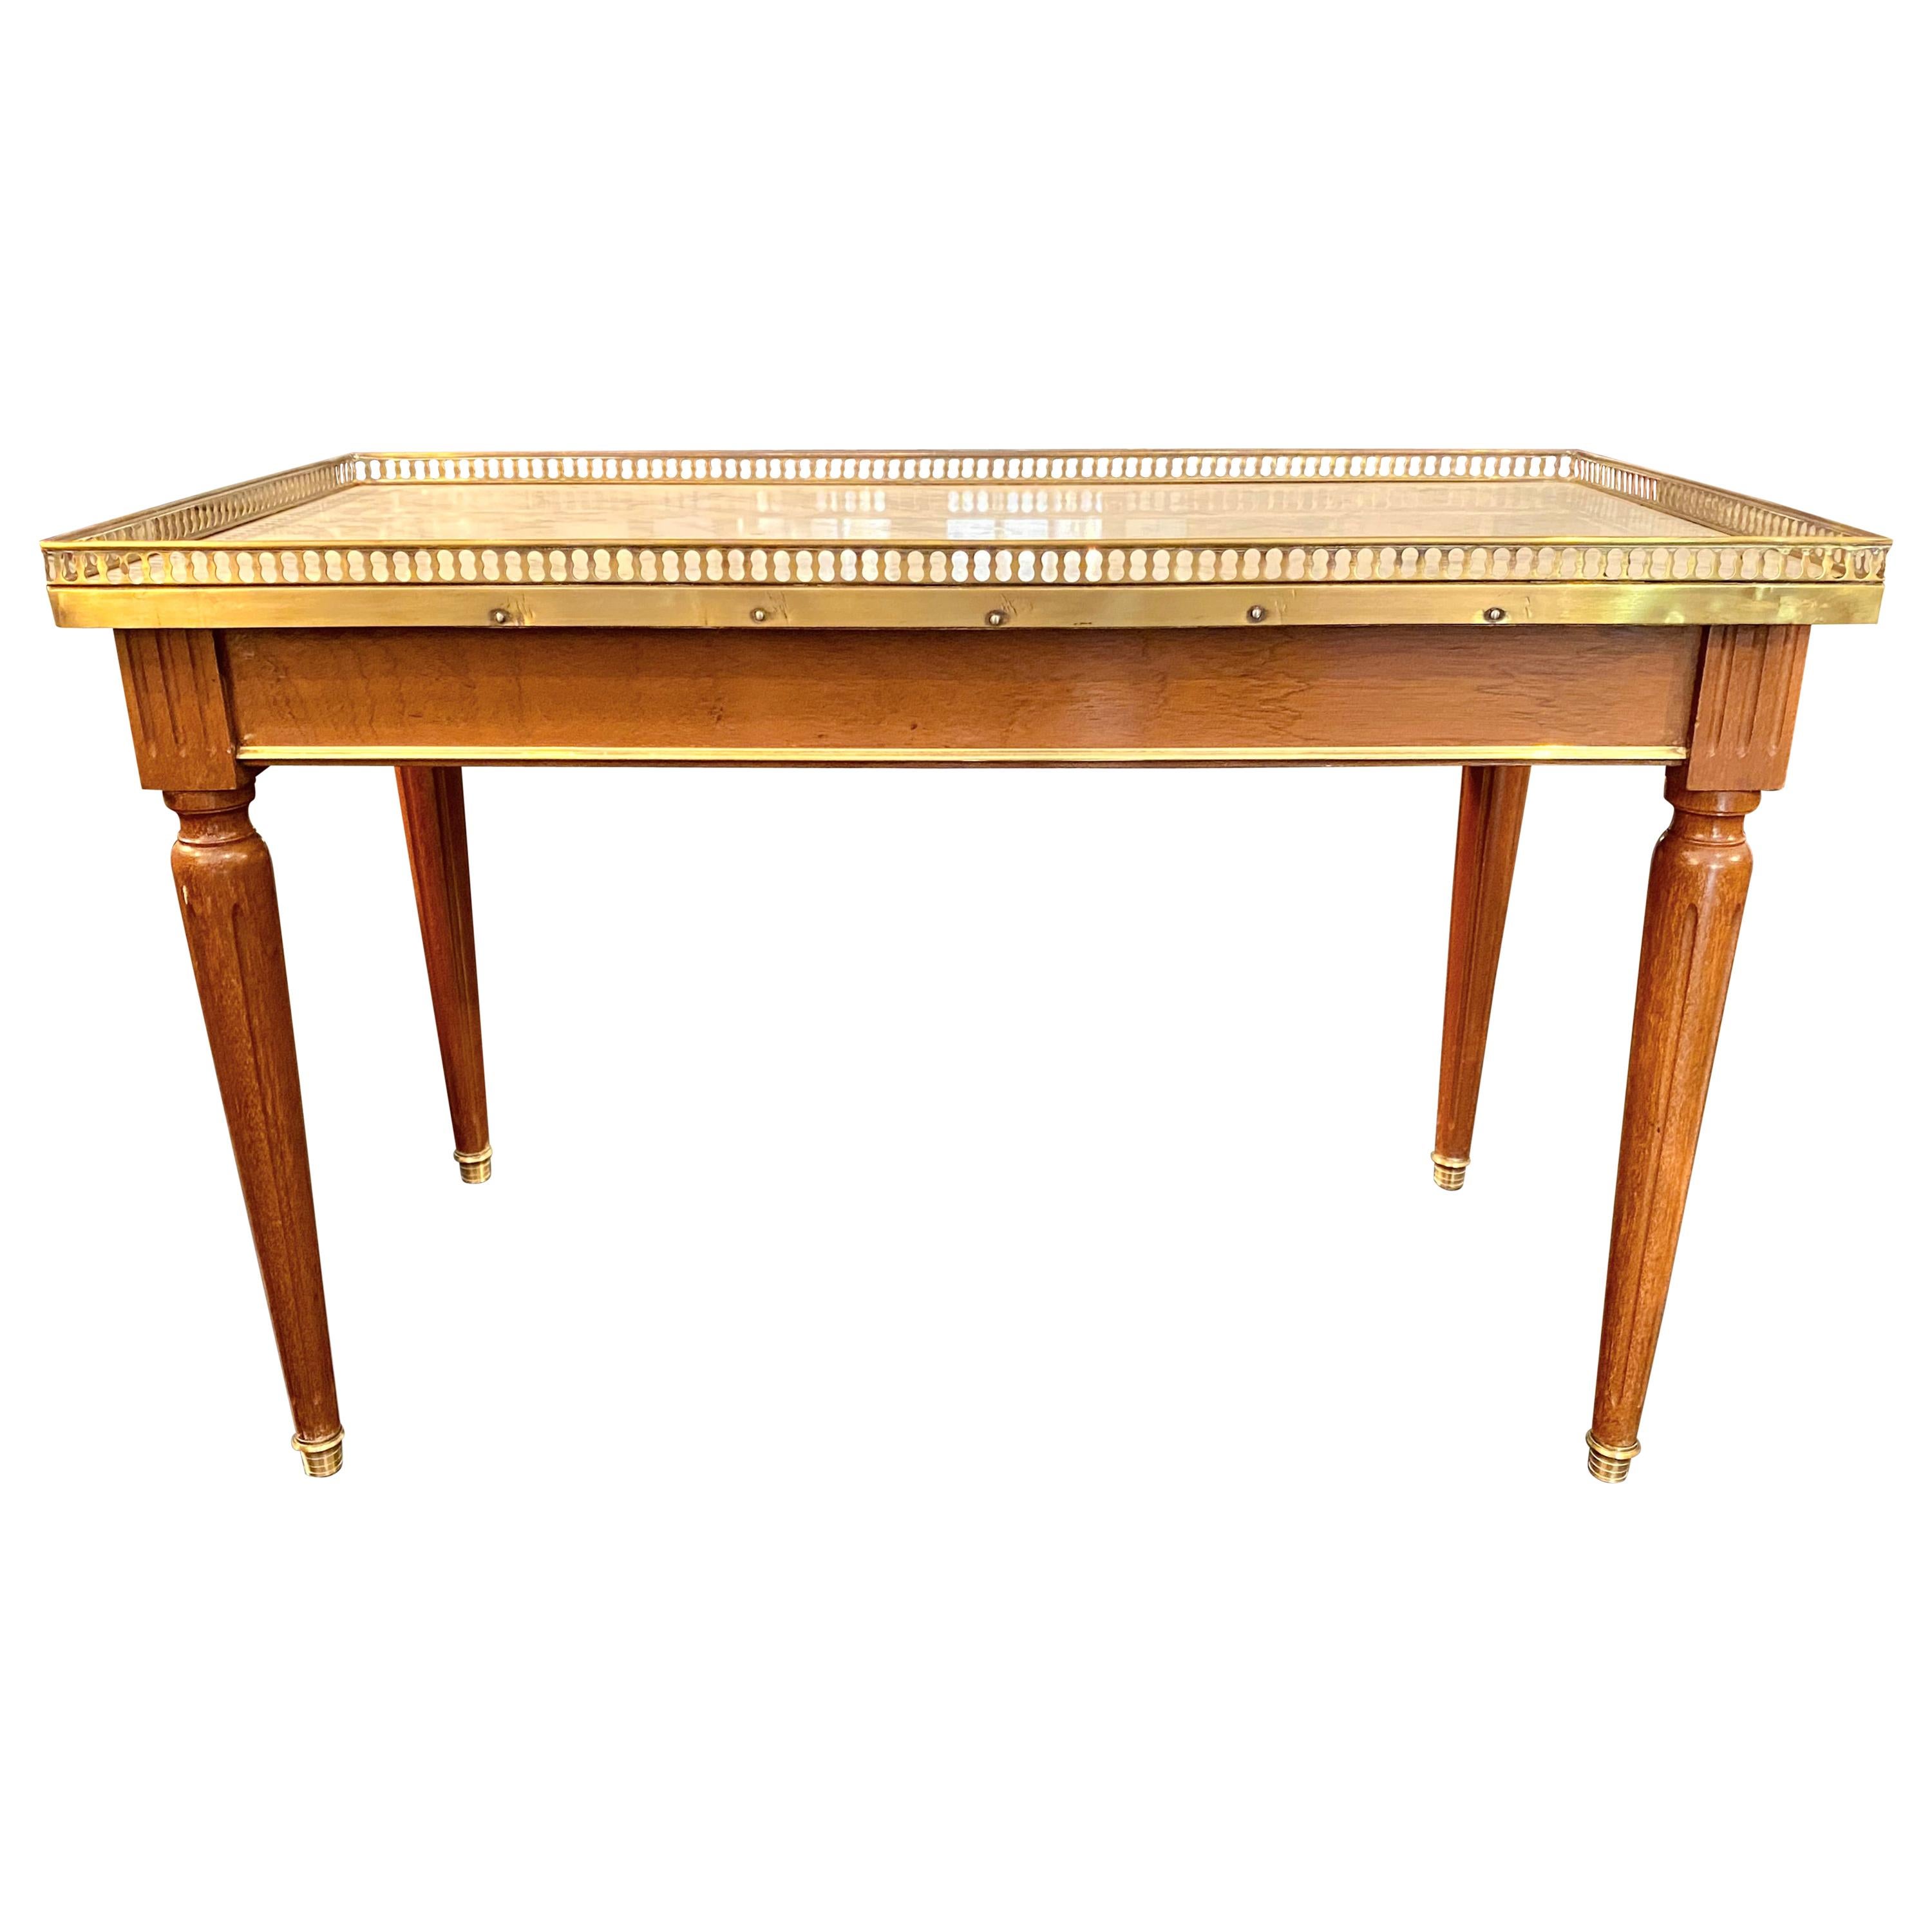 French Maison Jansen Style Low Table, Classic Louis XVI Style